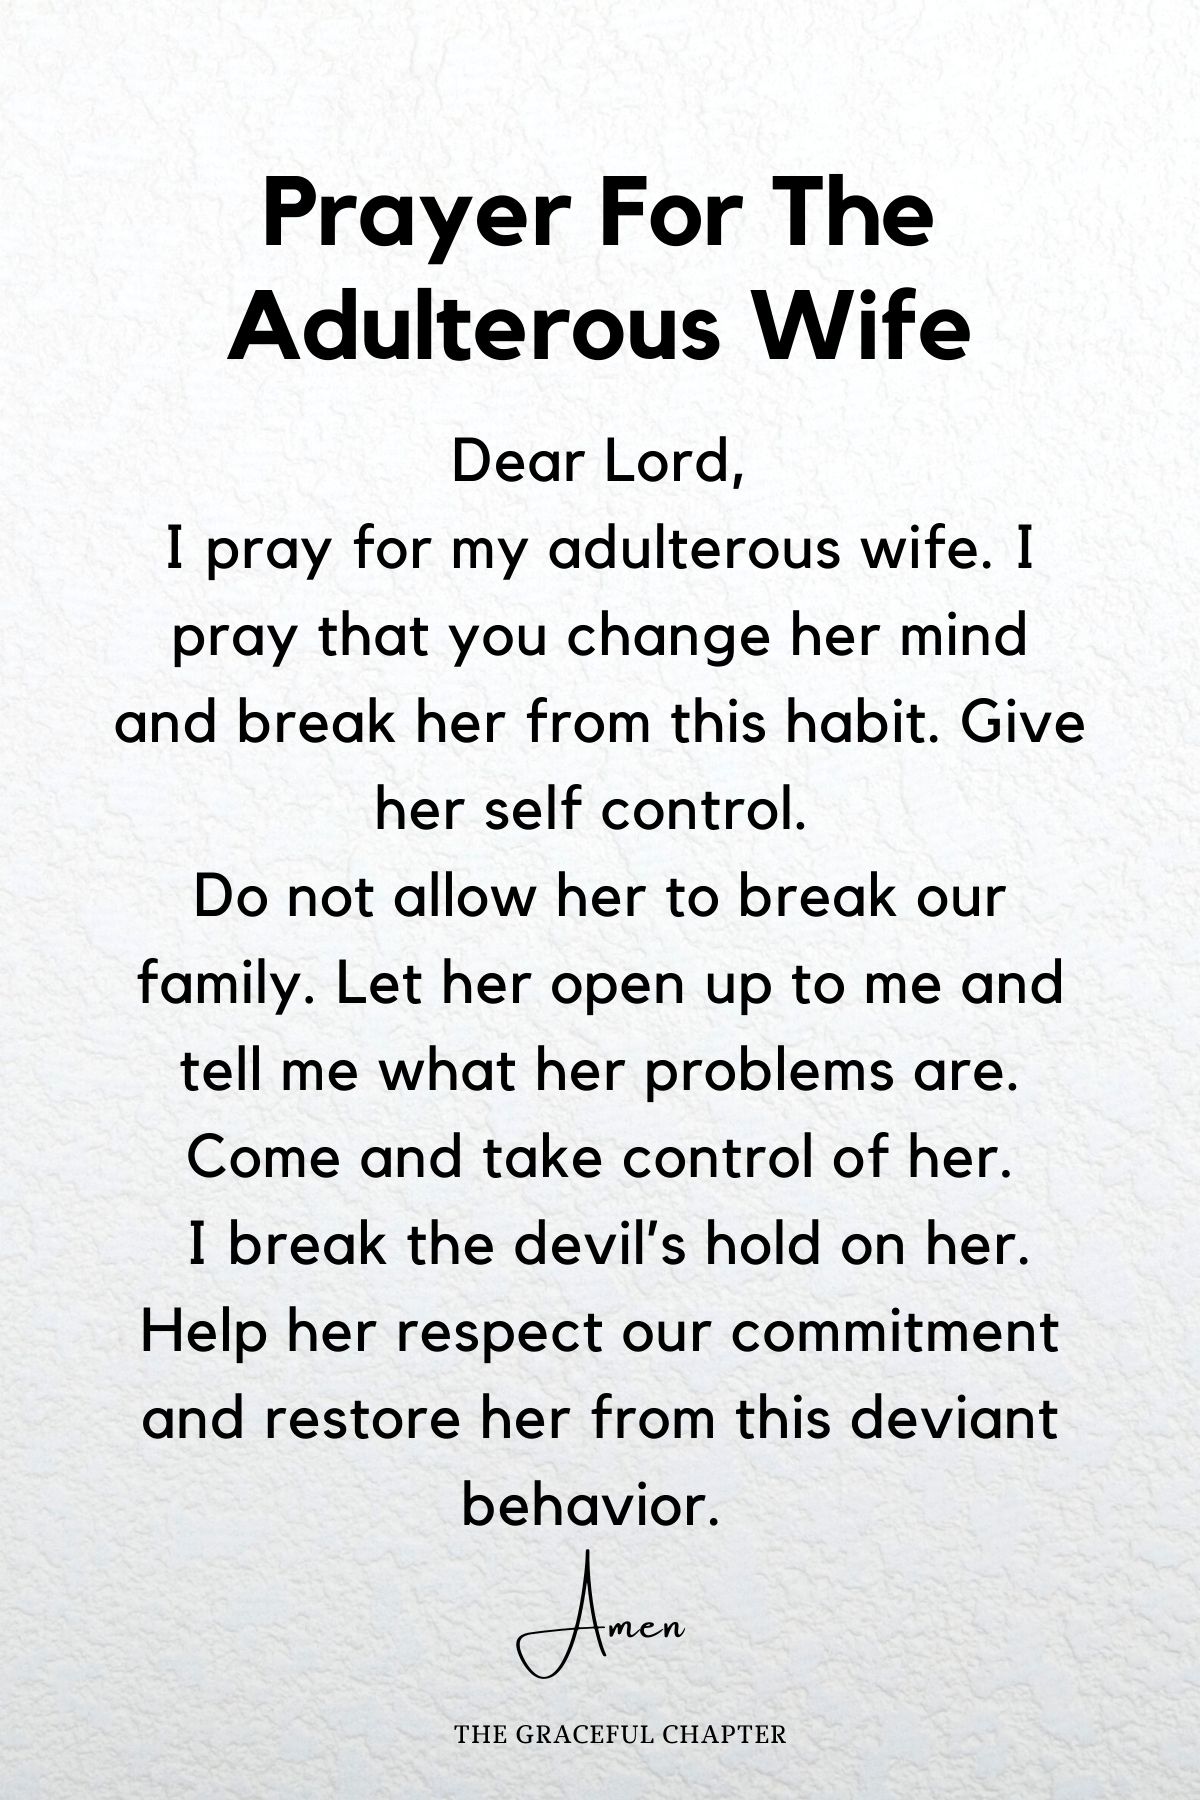 Prayer for the adulterous wife